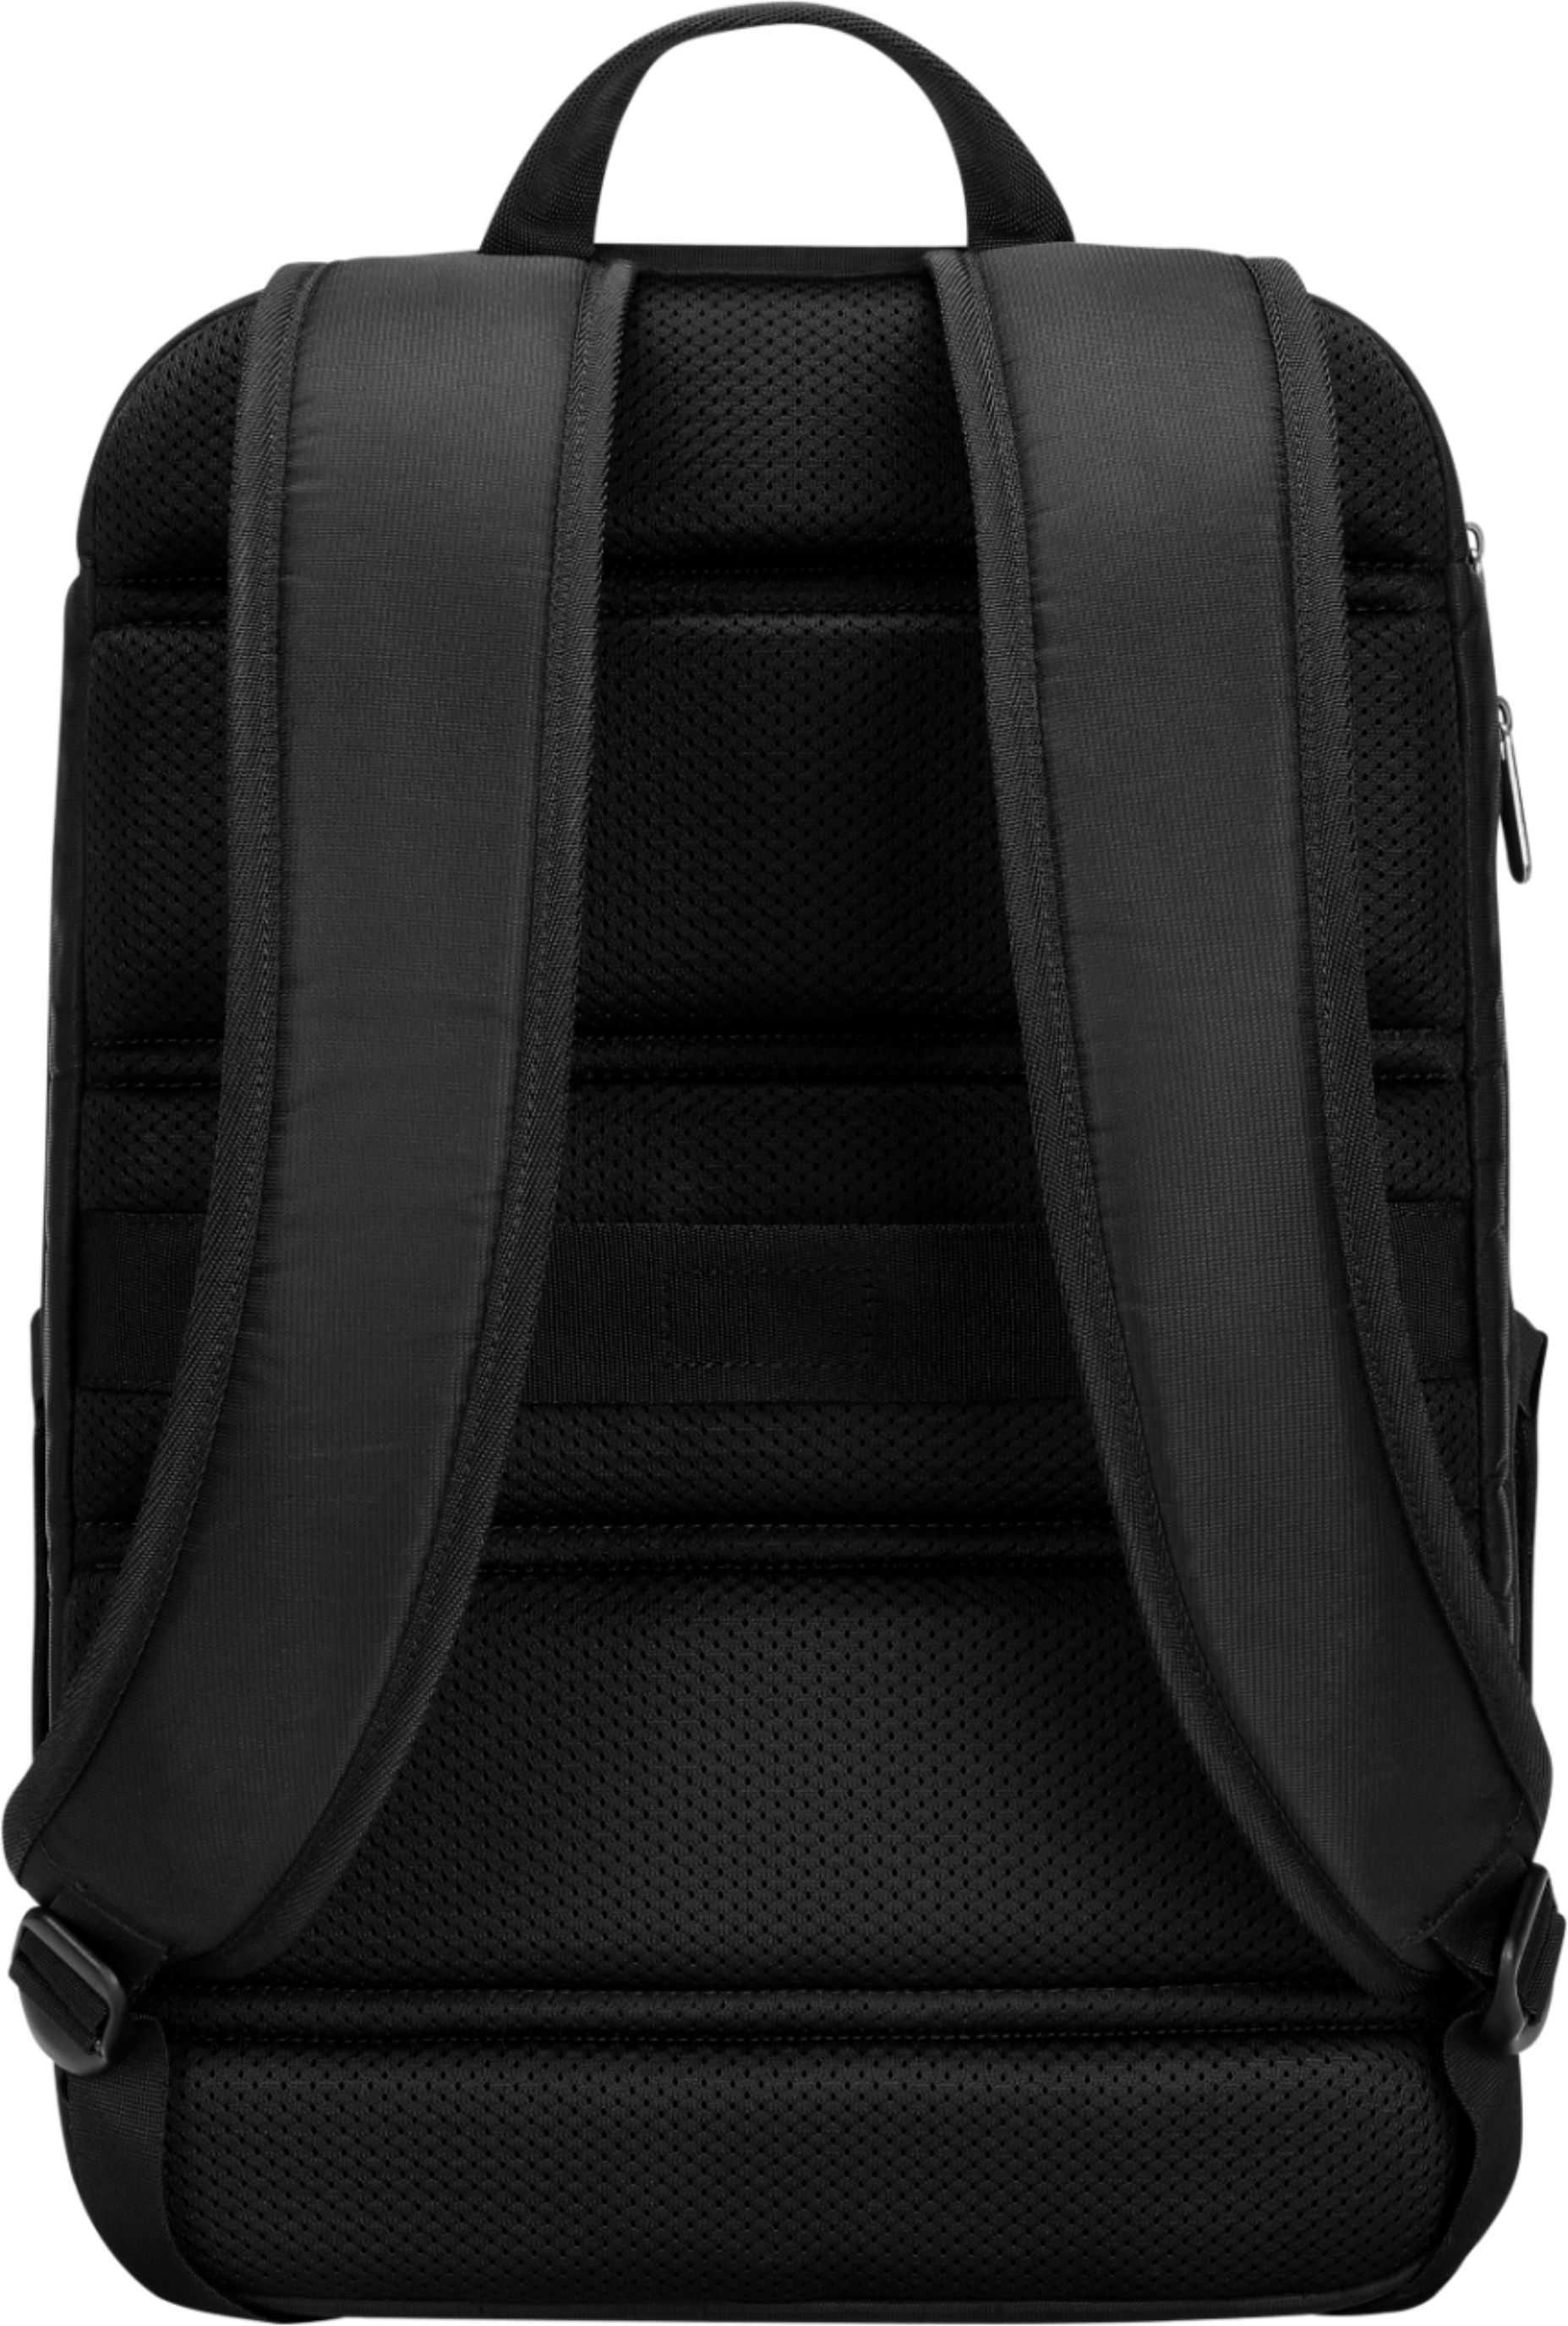 Angle View: Samsonite - Classic Business Shuttle Laptop Case for 15.6" Laptop - Black